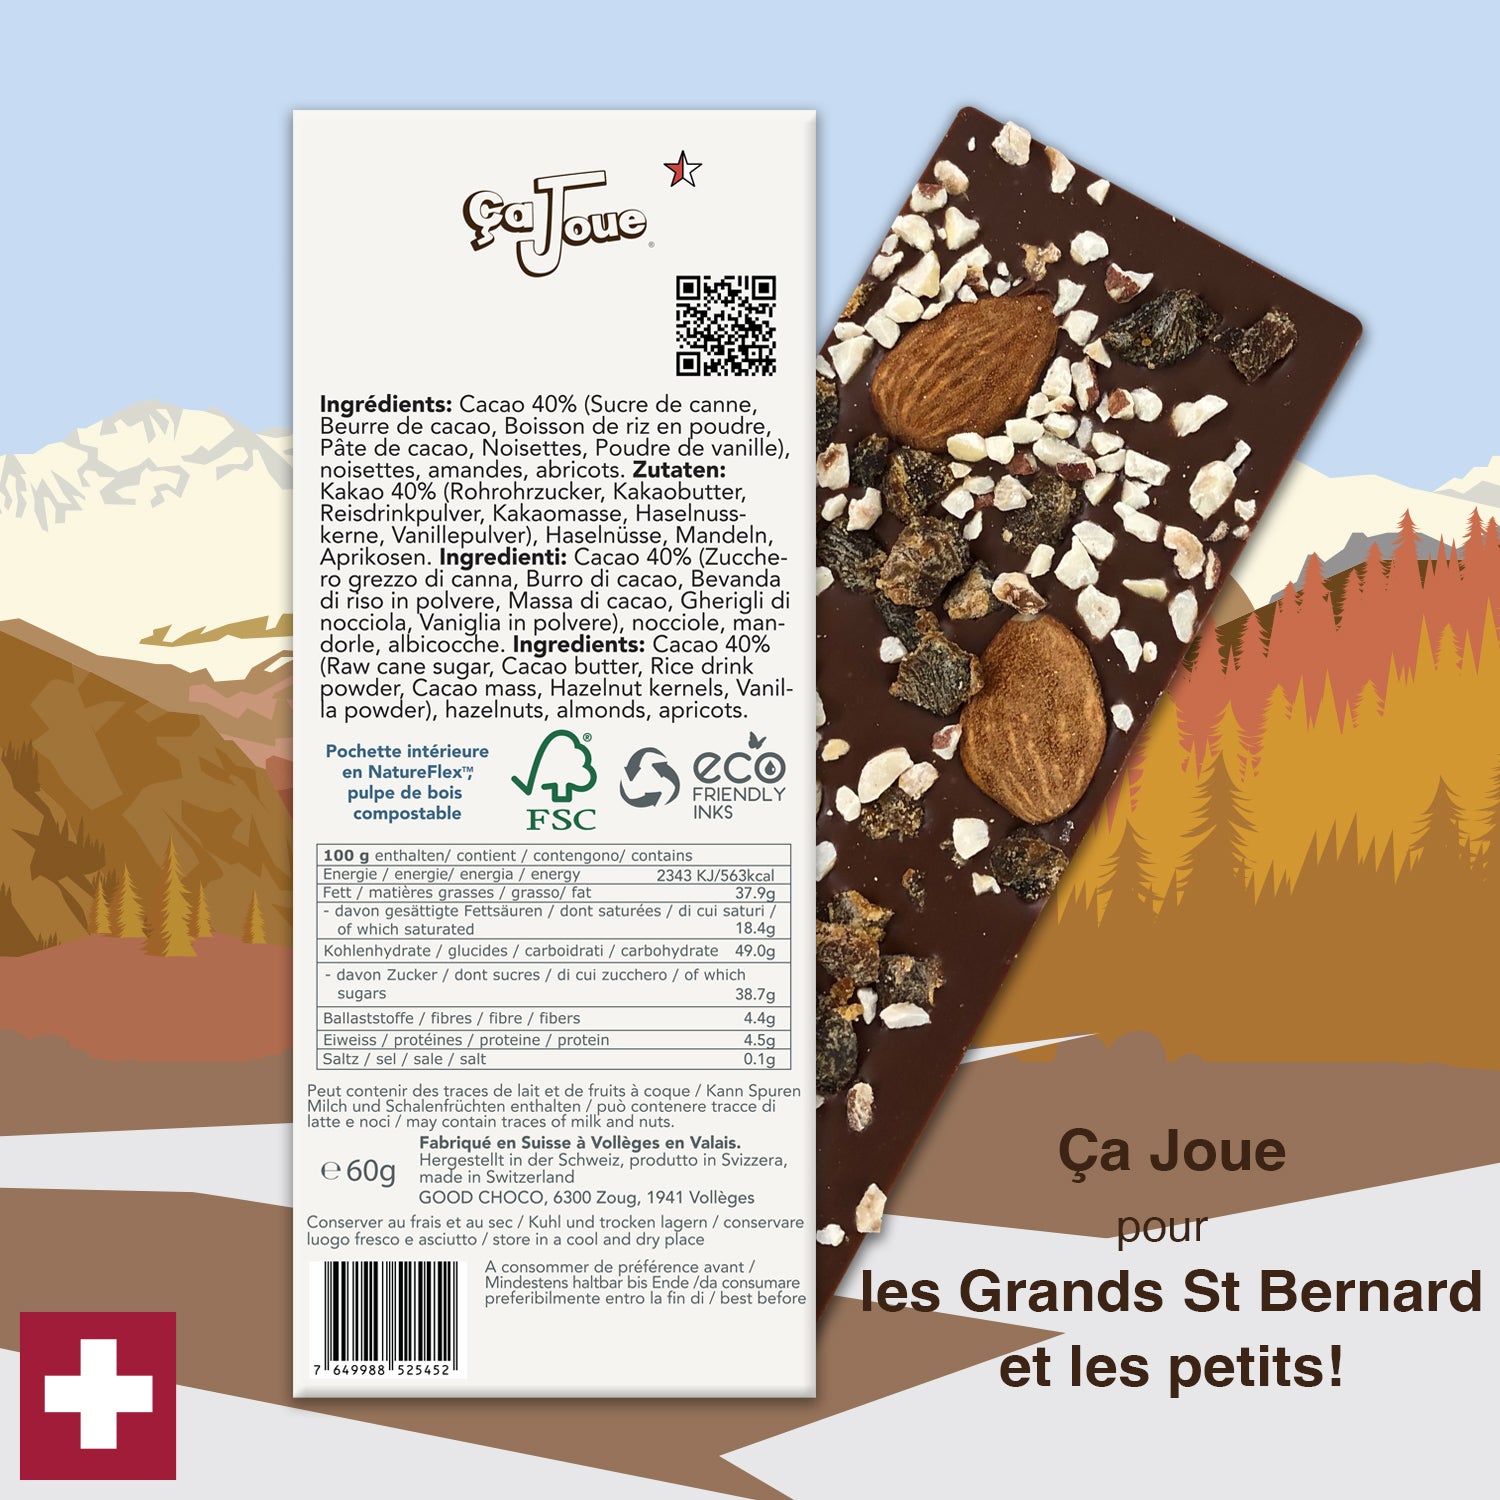 Ça Joue for the for little St Bernards (Ref-BV4) Chocolate from Val de Bagnes